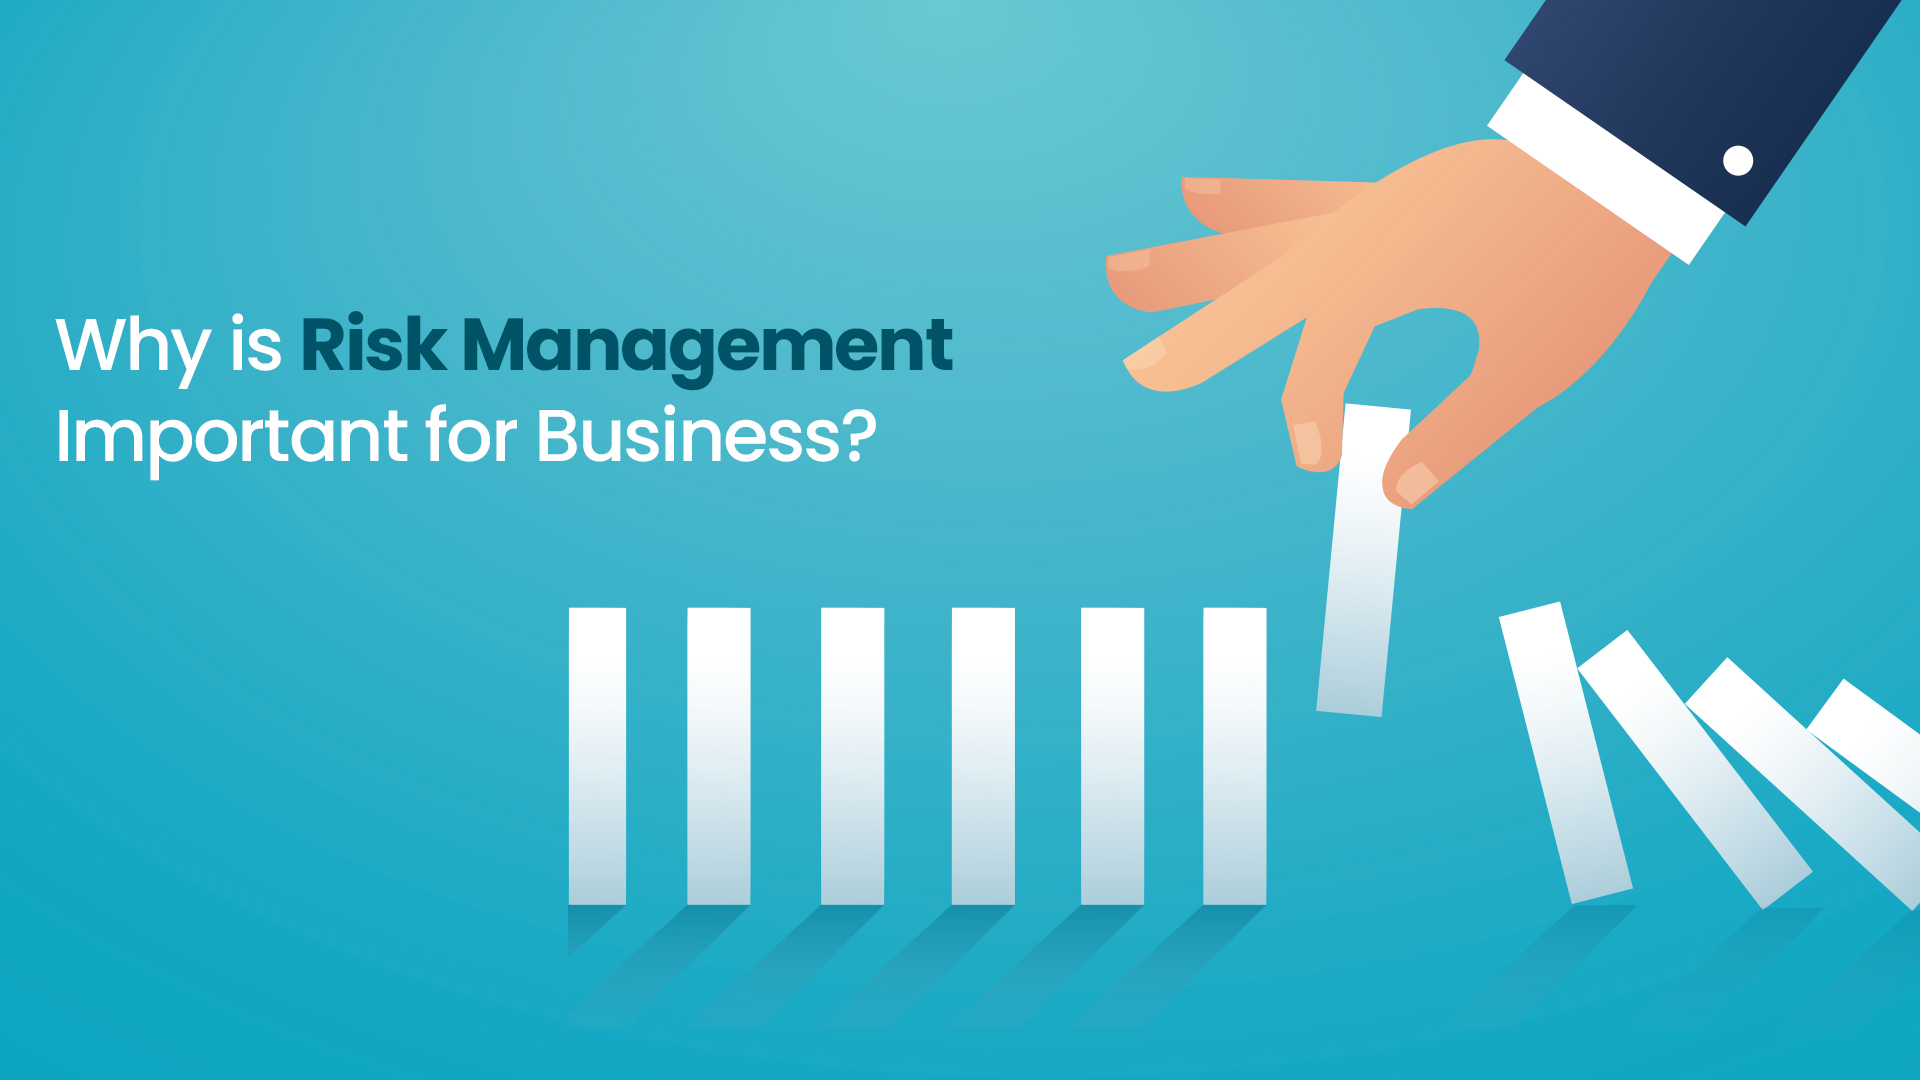 Why is Risk Management Important for Business?